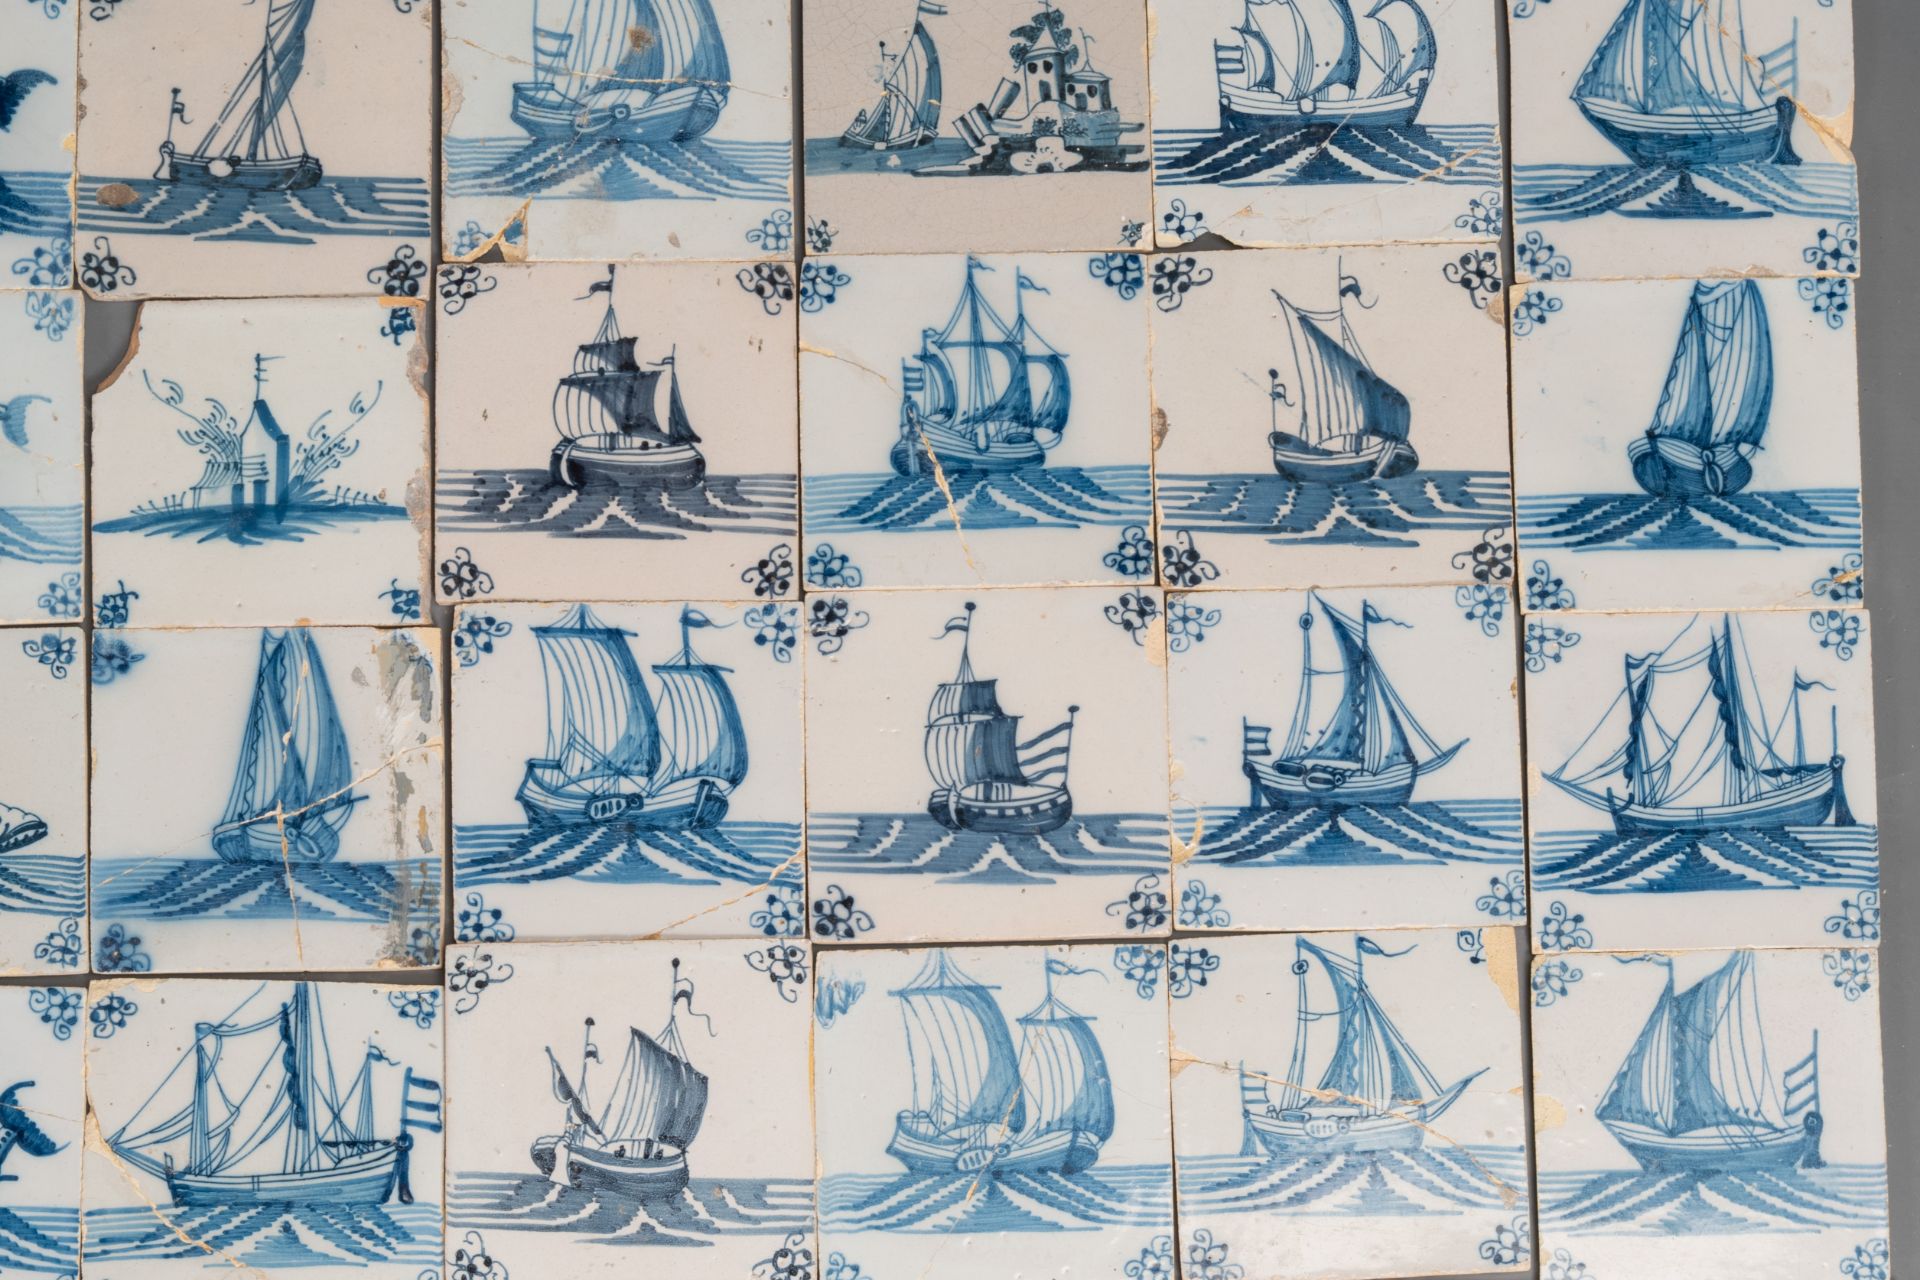 92 blue and white Dutch Delft tiles with sea monsters and ships, 18th C. - Image 12 of 16